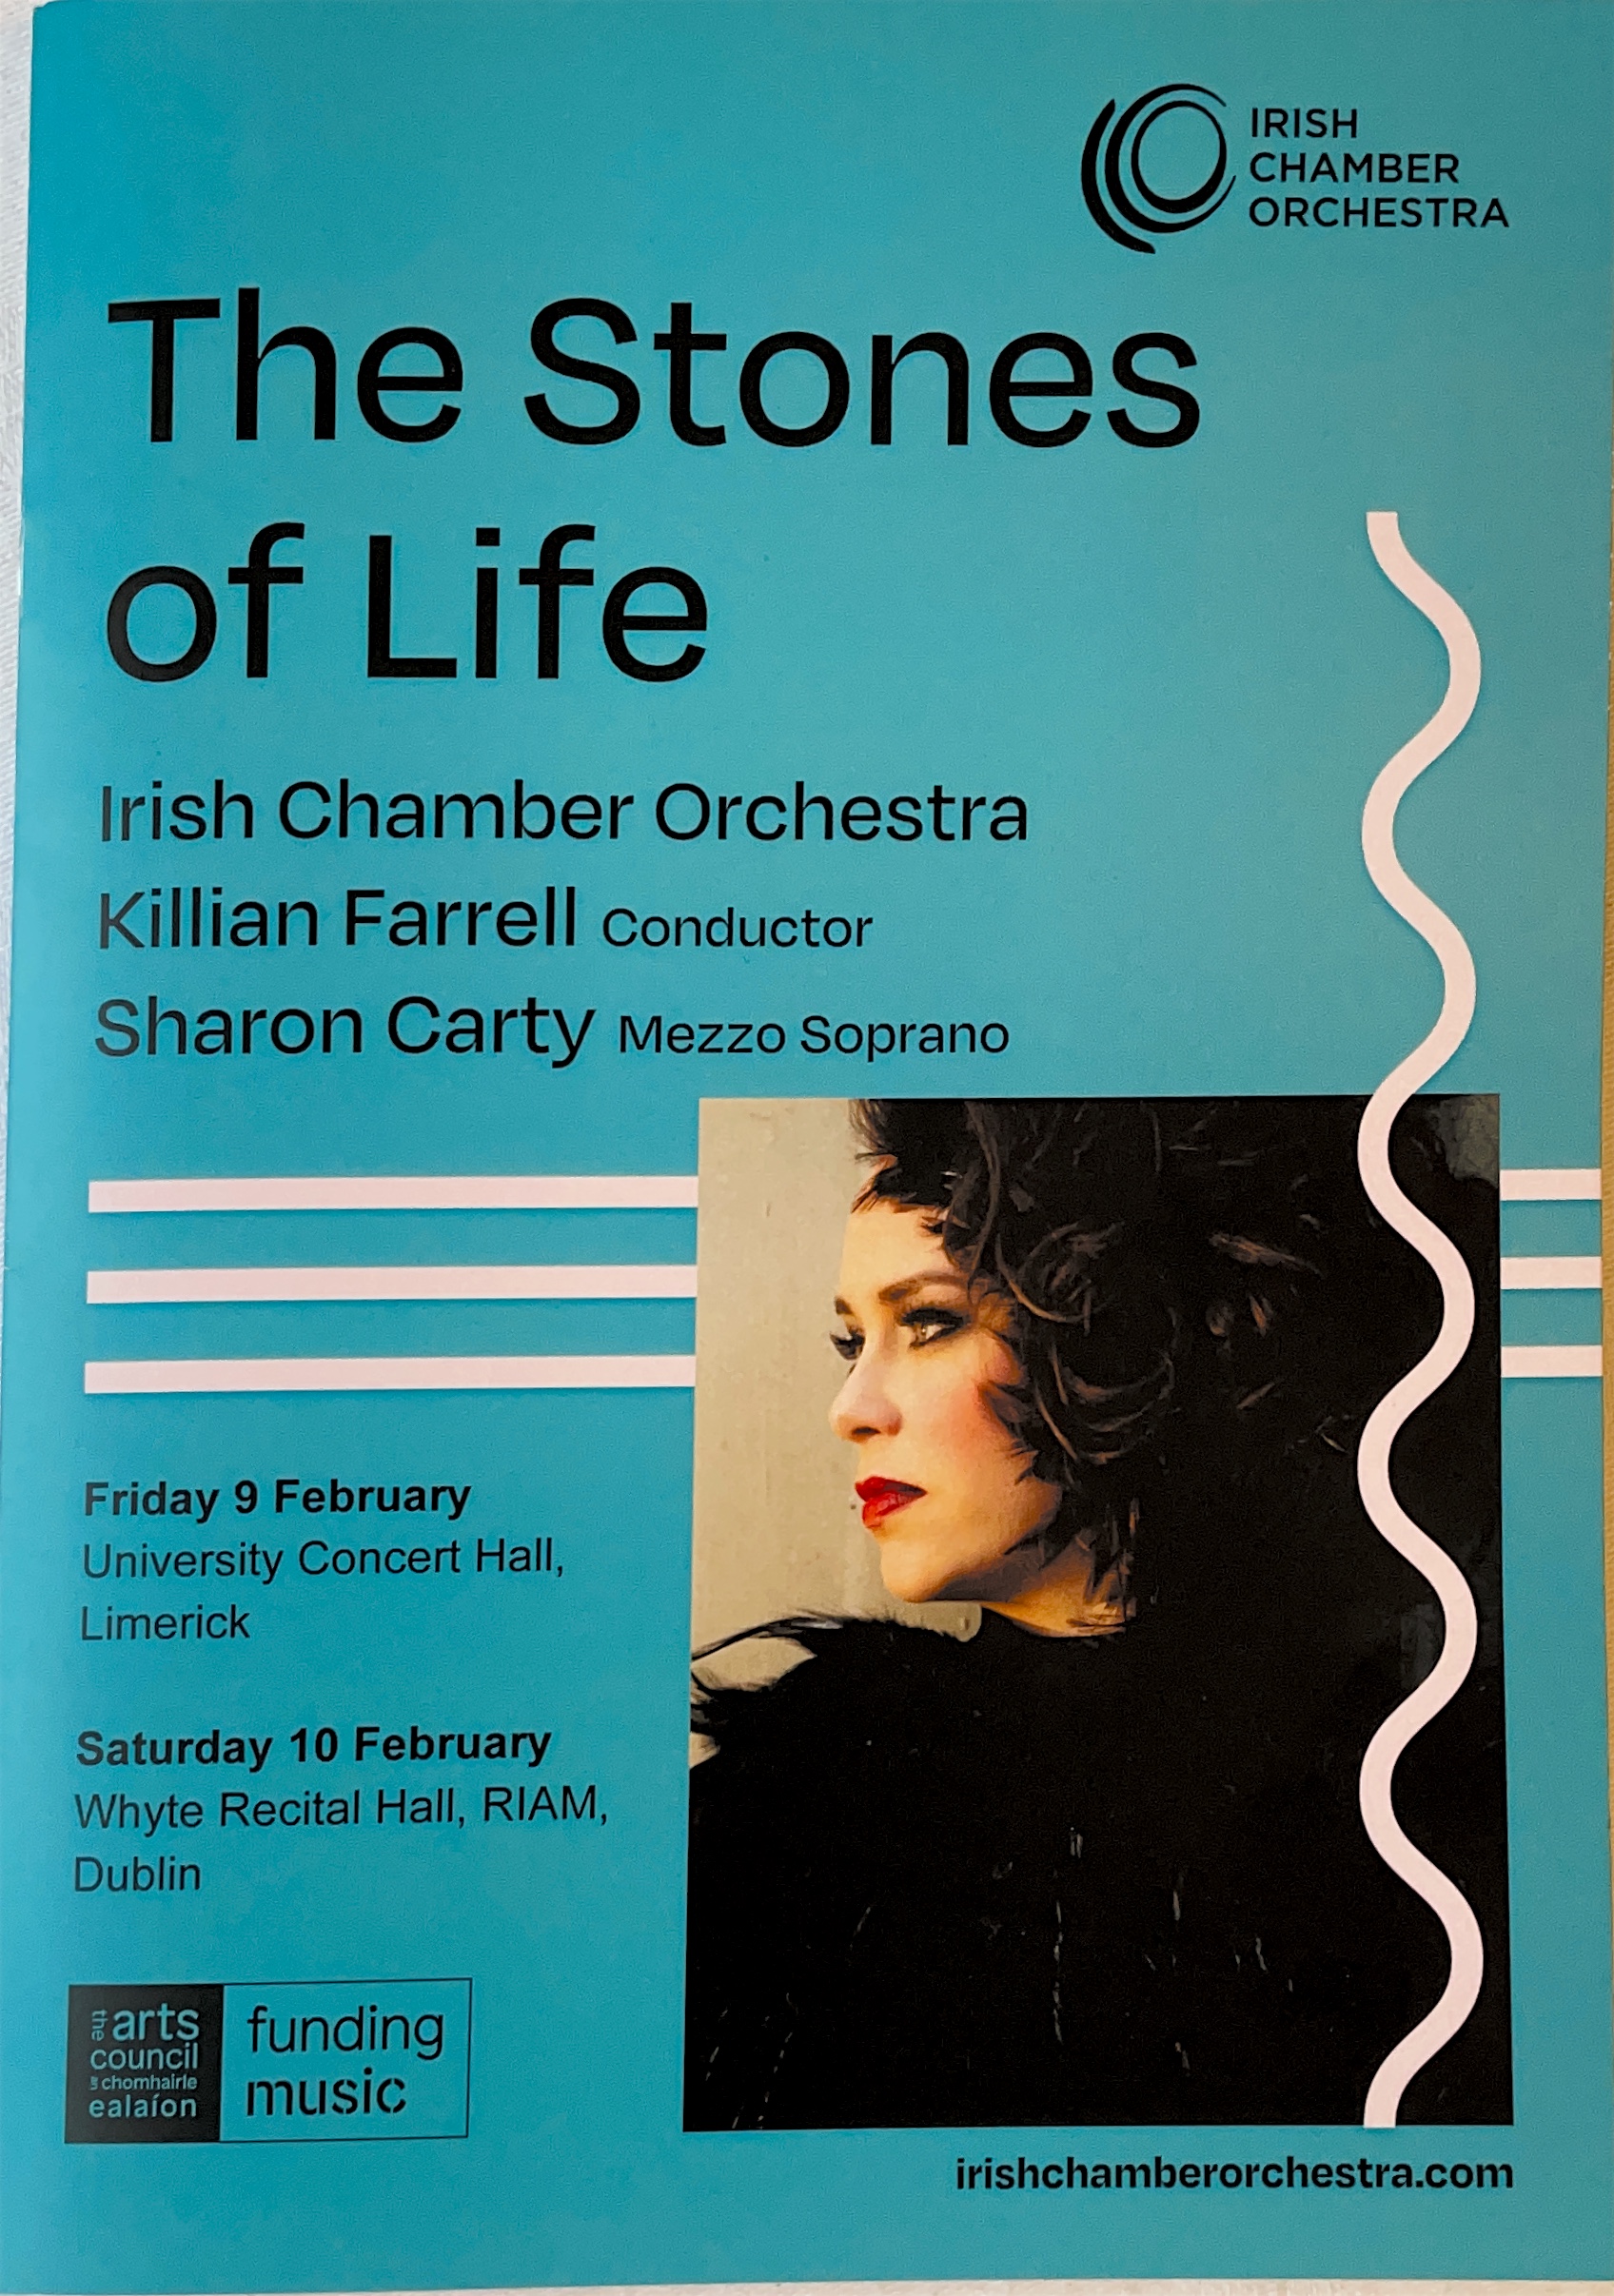 Ethan Stein mentioned on the Stones of Life poster